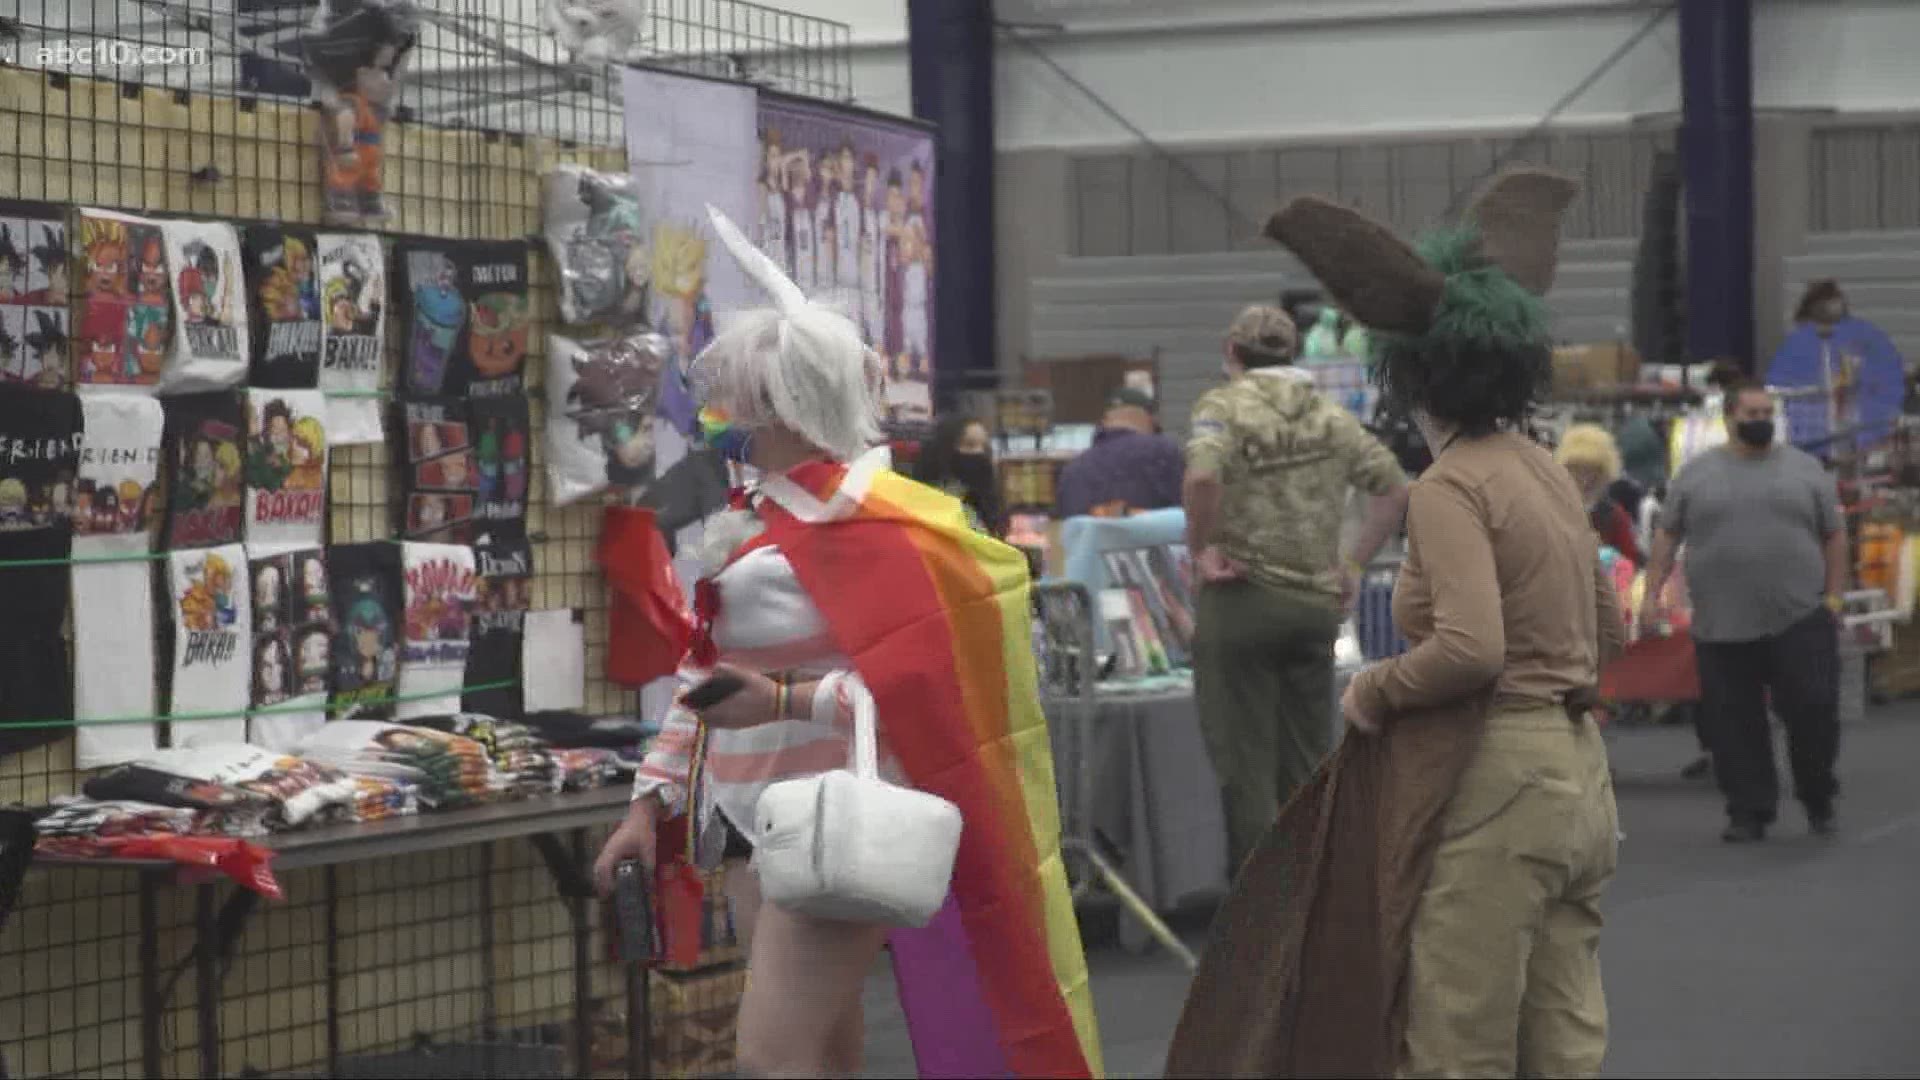 About 6,000 people registered for Sac Anime this year's event, but Sac Anime says, it's hardly normal attendance.